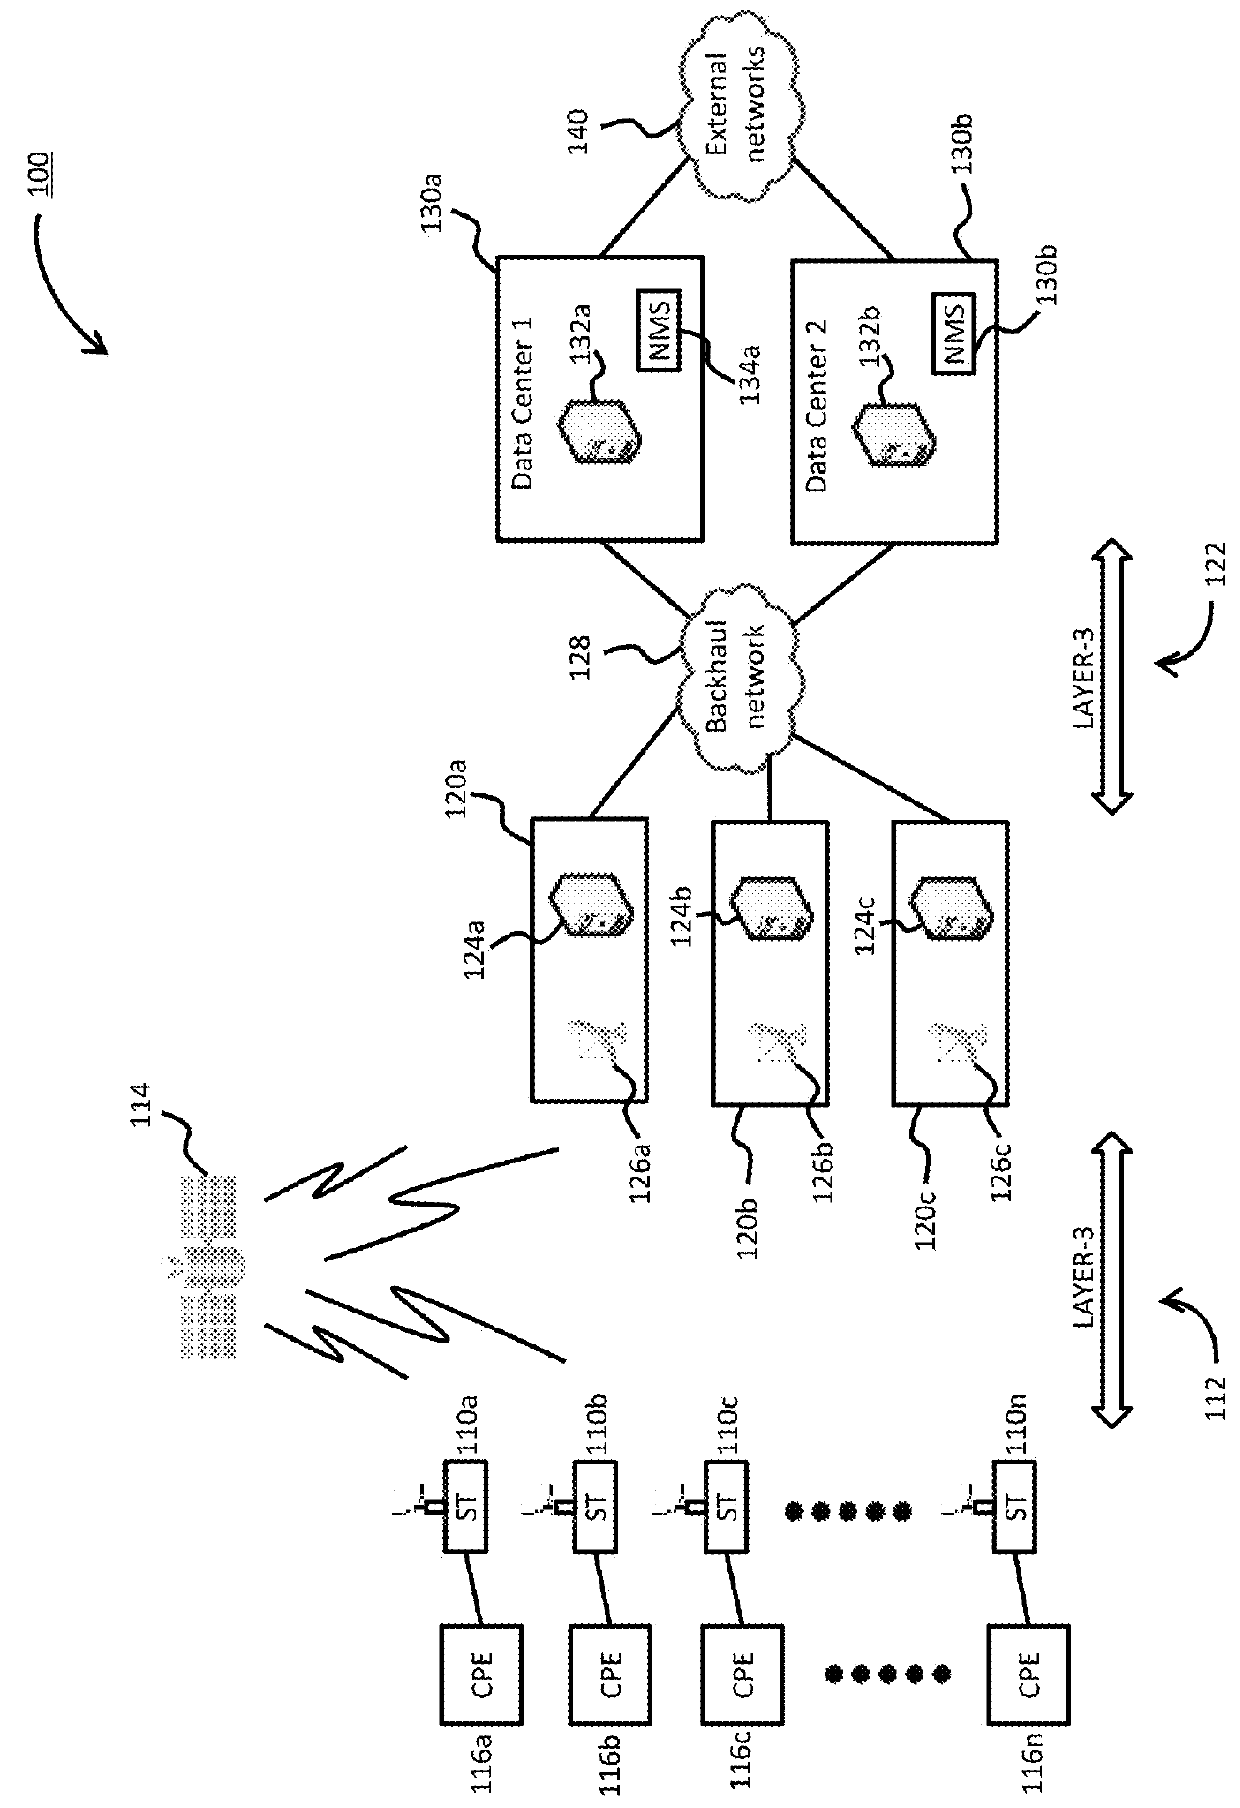 Distributed gateways with centralized data center for high throughput satellite (HTS) spot beam network